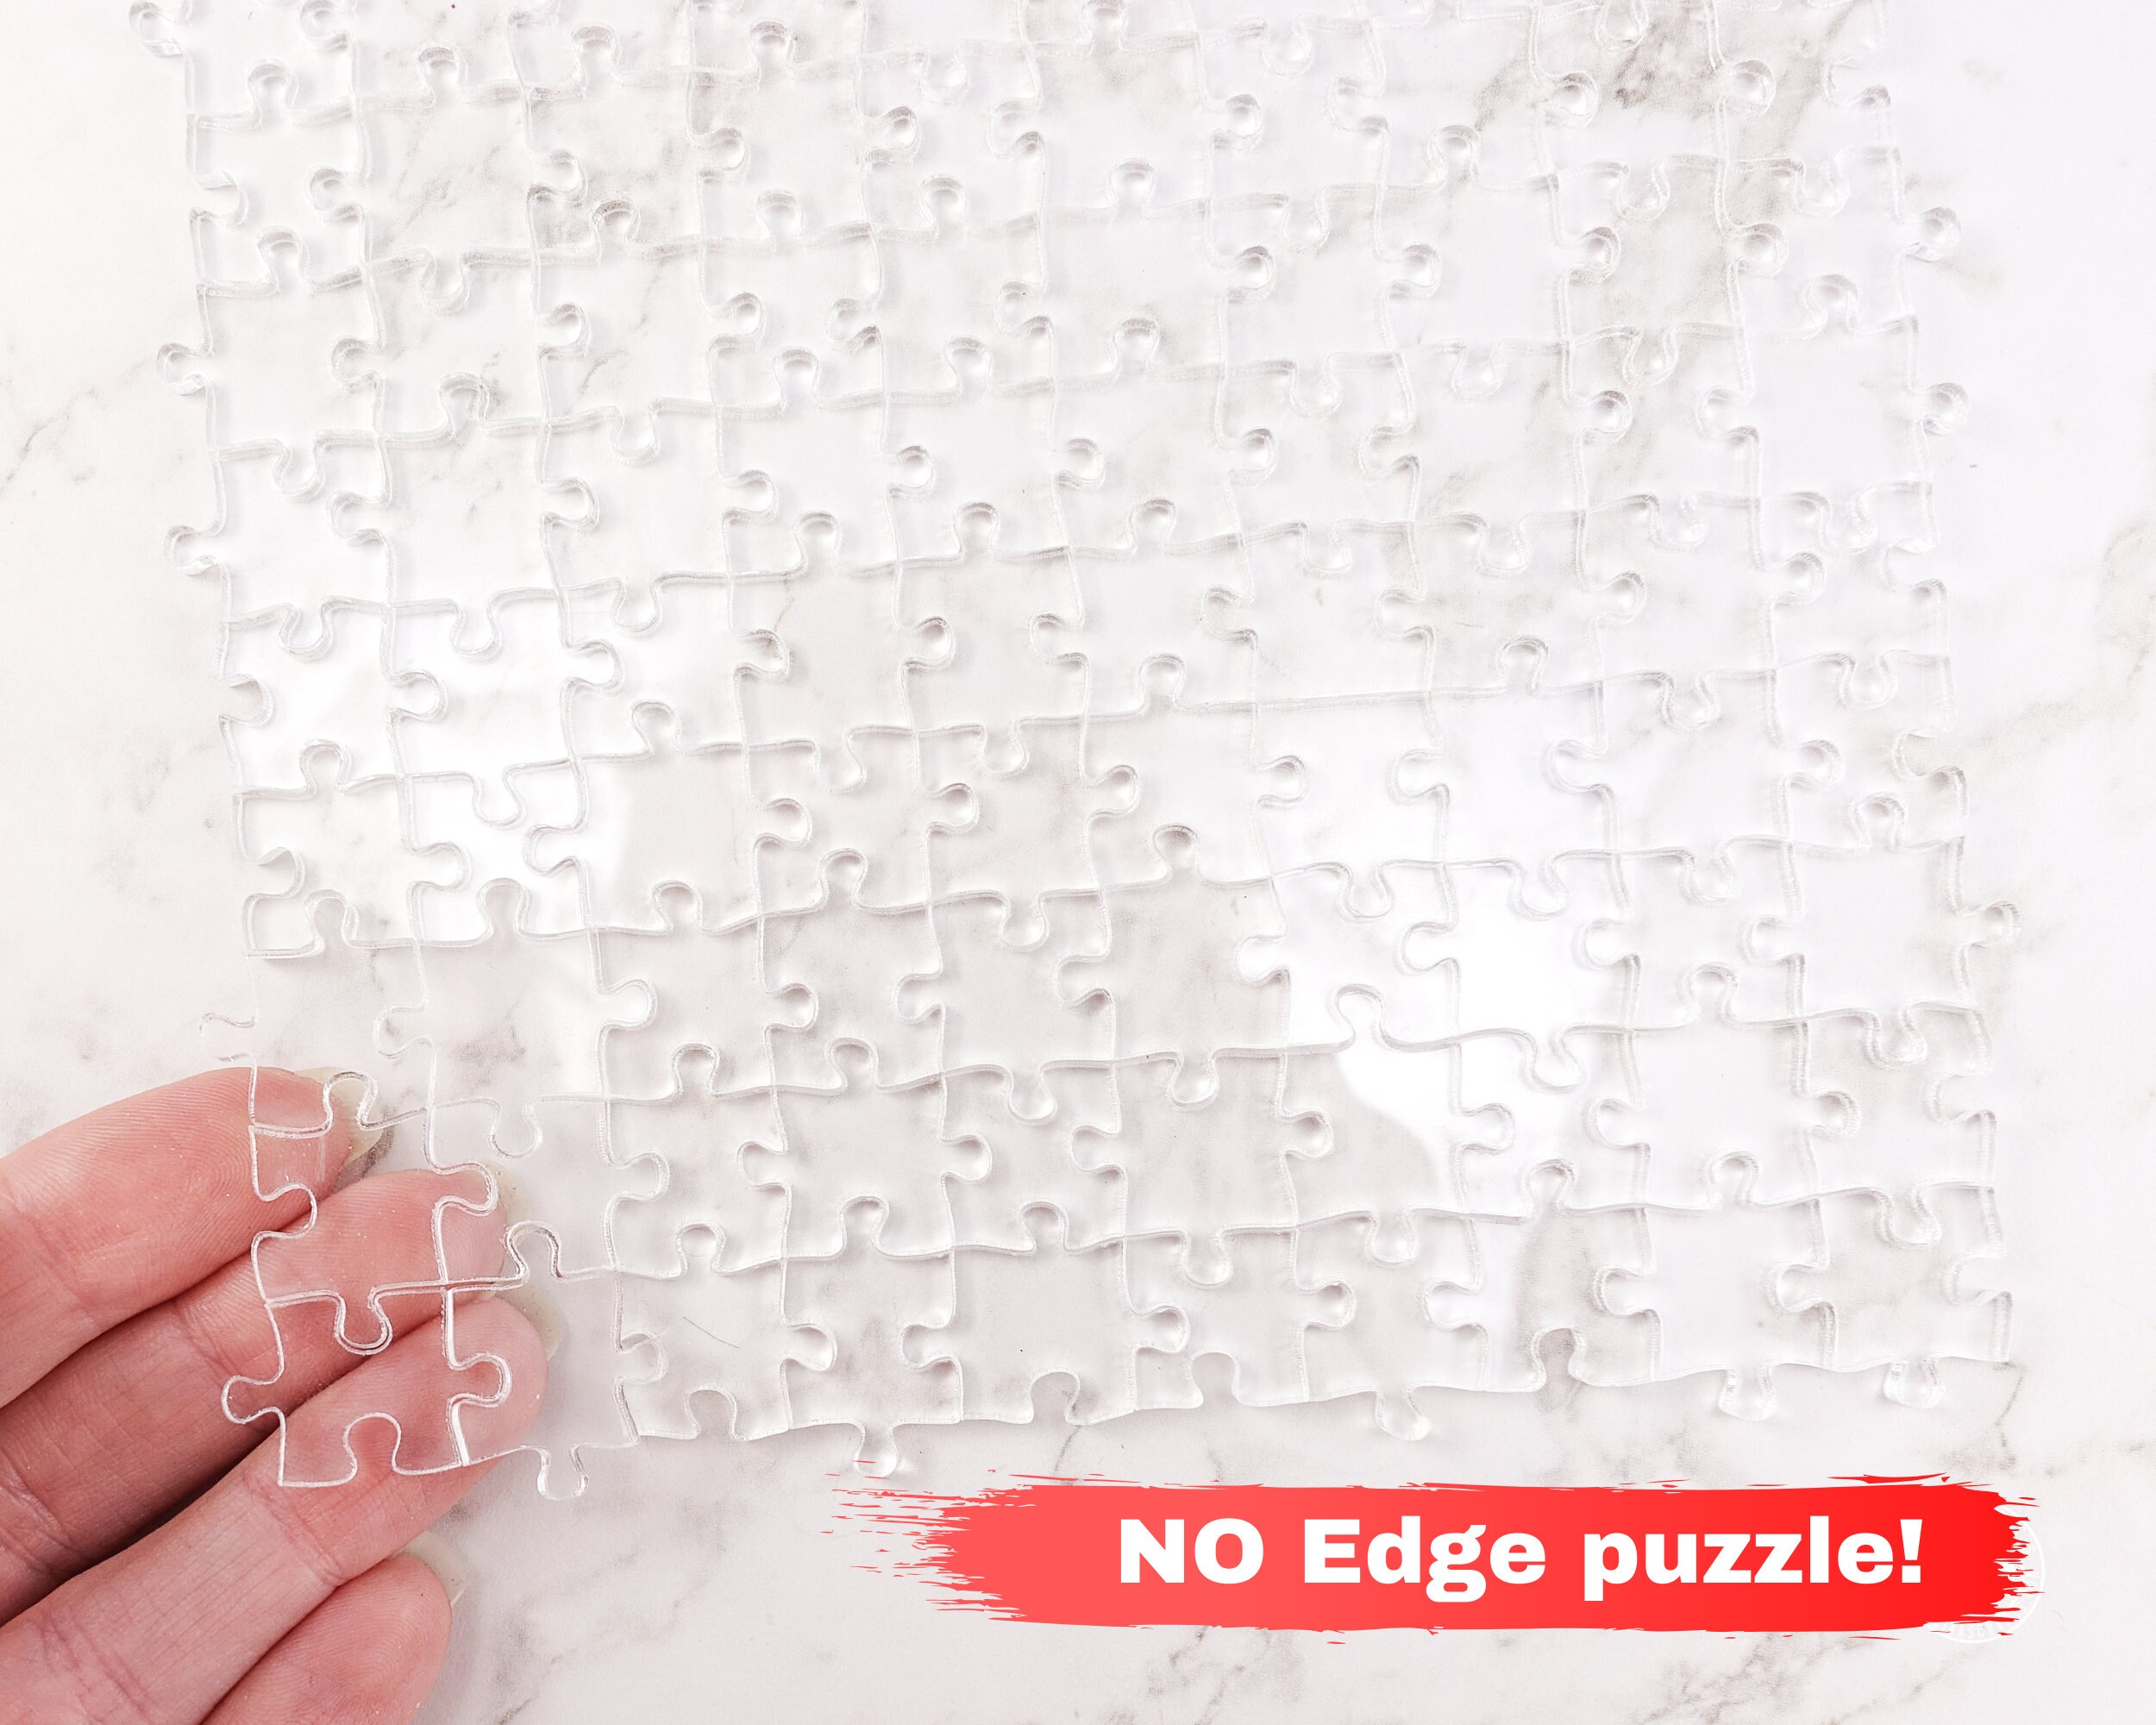 NO Edge Impossible Clear Puzzle, Impossible Acrylic Jigsaw Puzzles for  Adults 